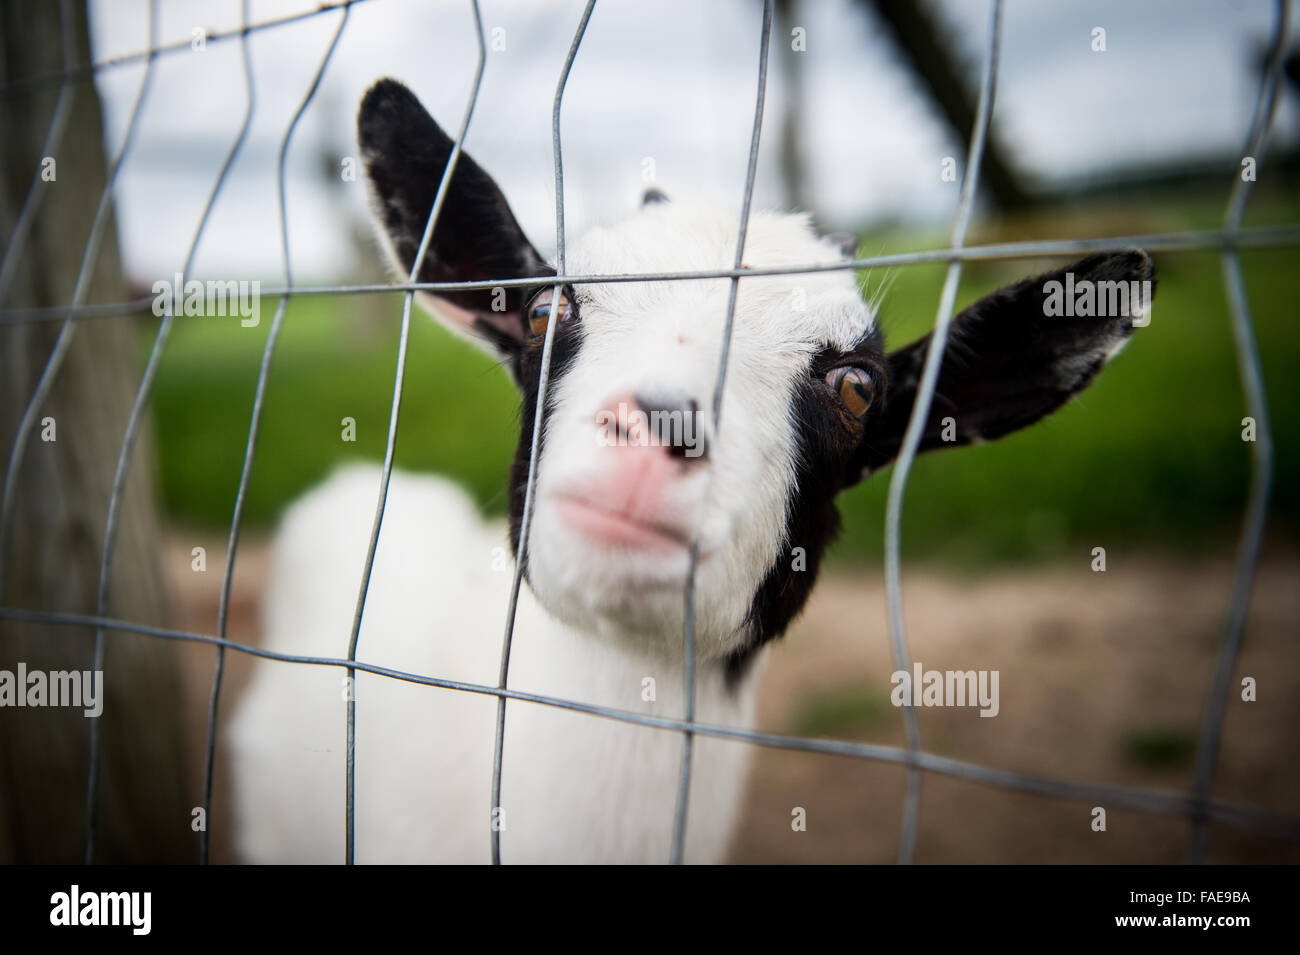 Black and white, baby goat sticking its nose through a fence Stock Photo